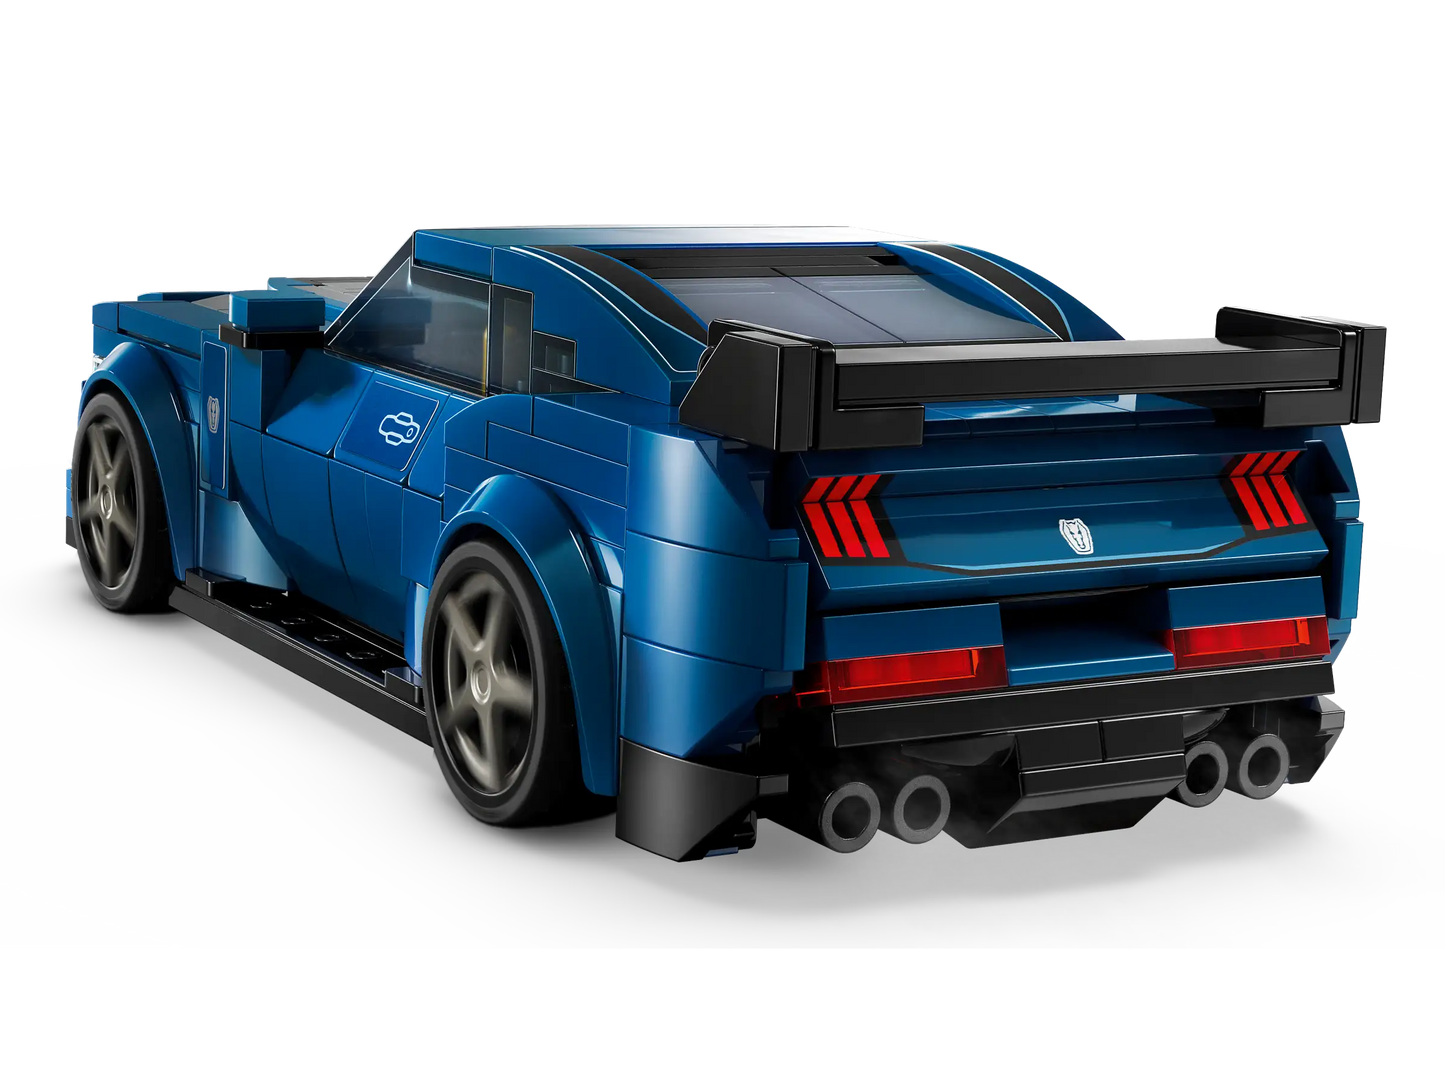 LEGO Speed Champions Ford Mustang Dark Horse